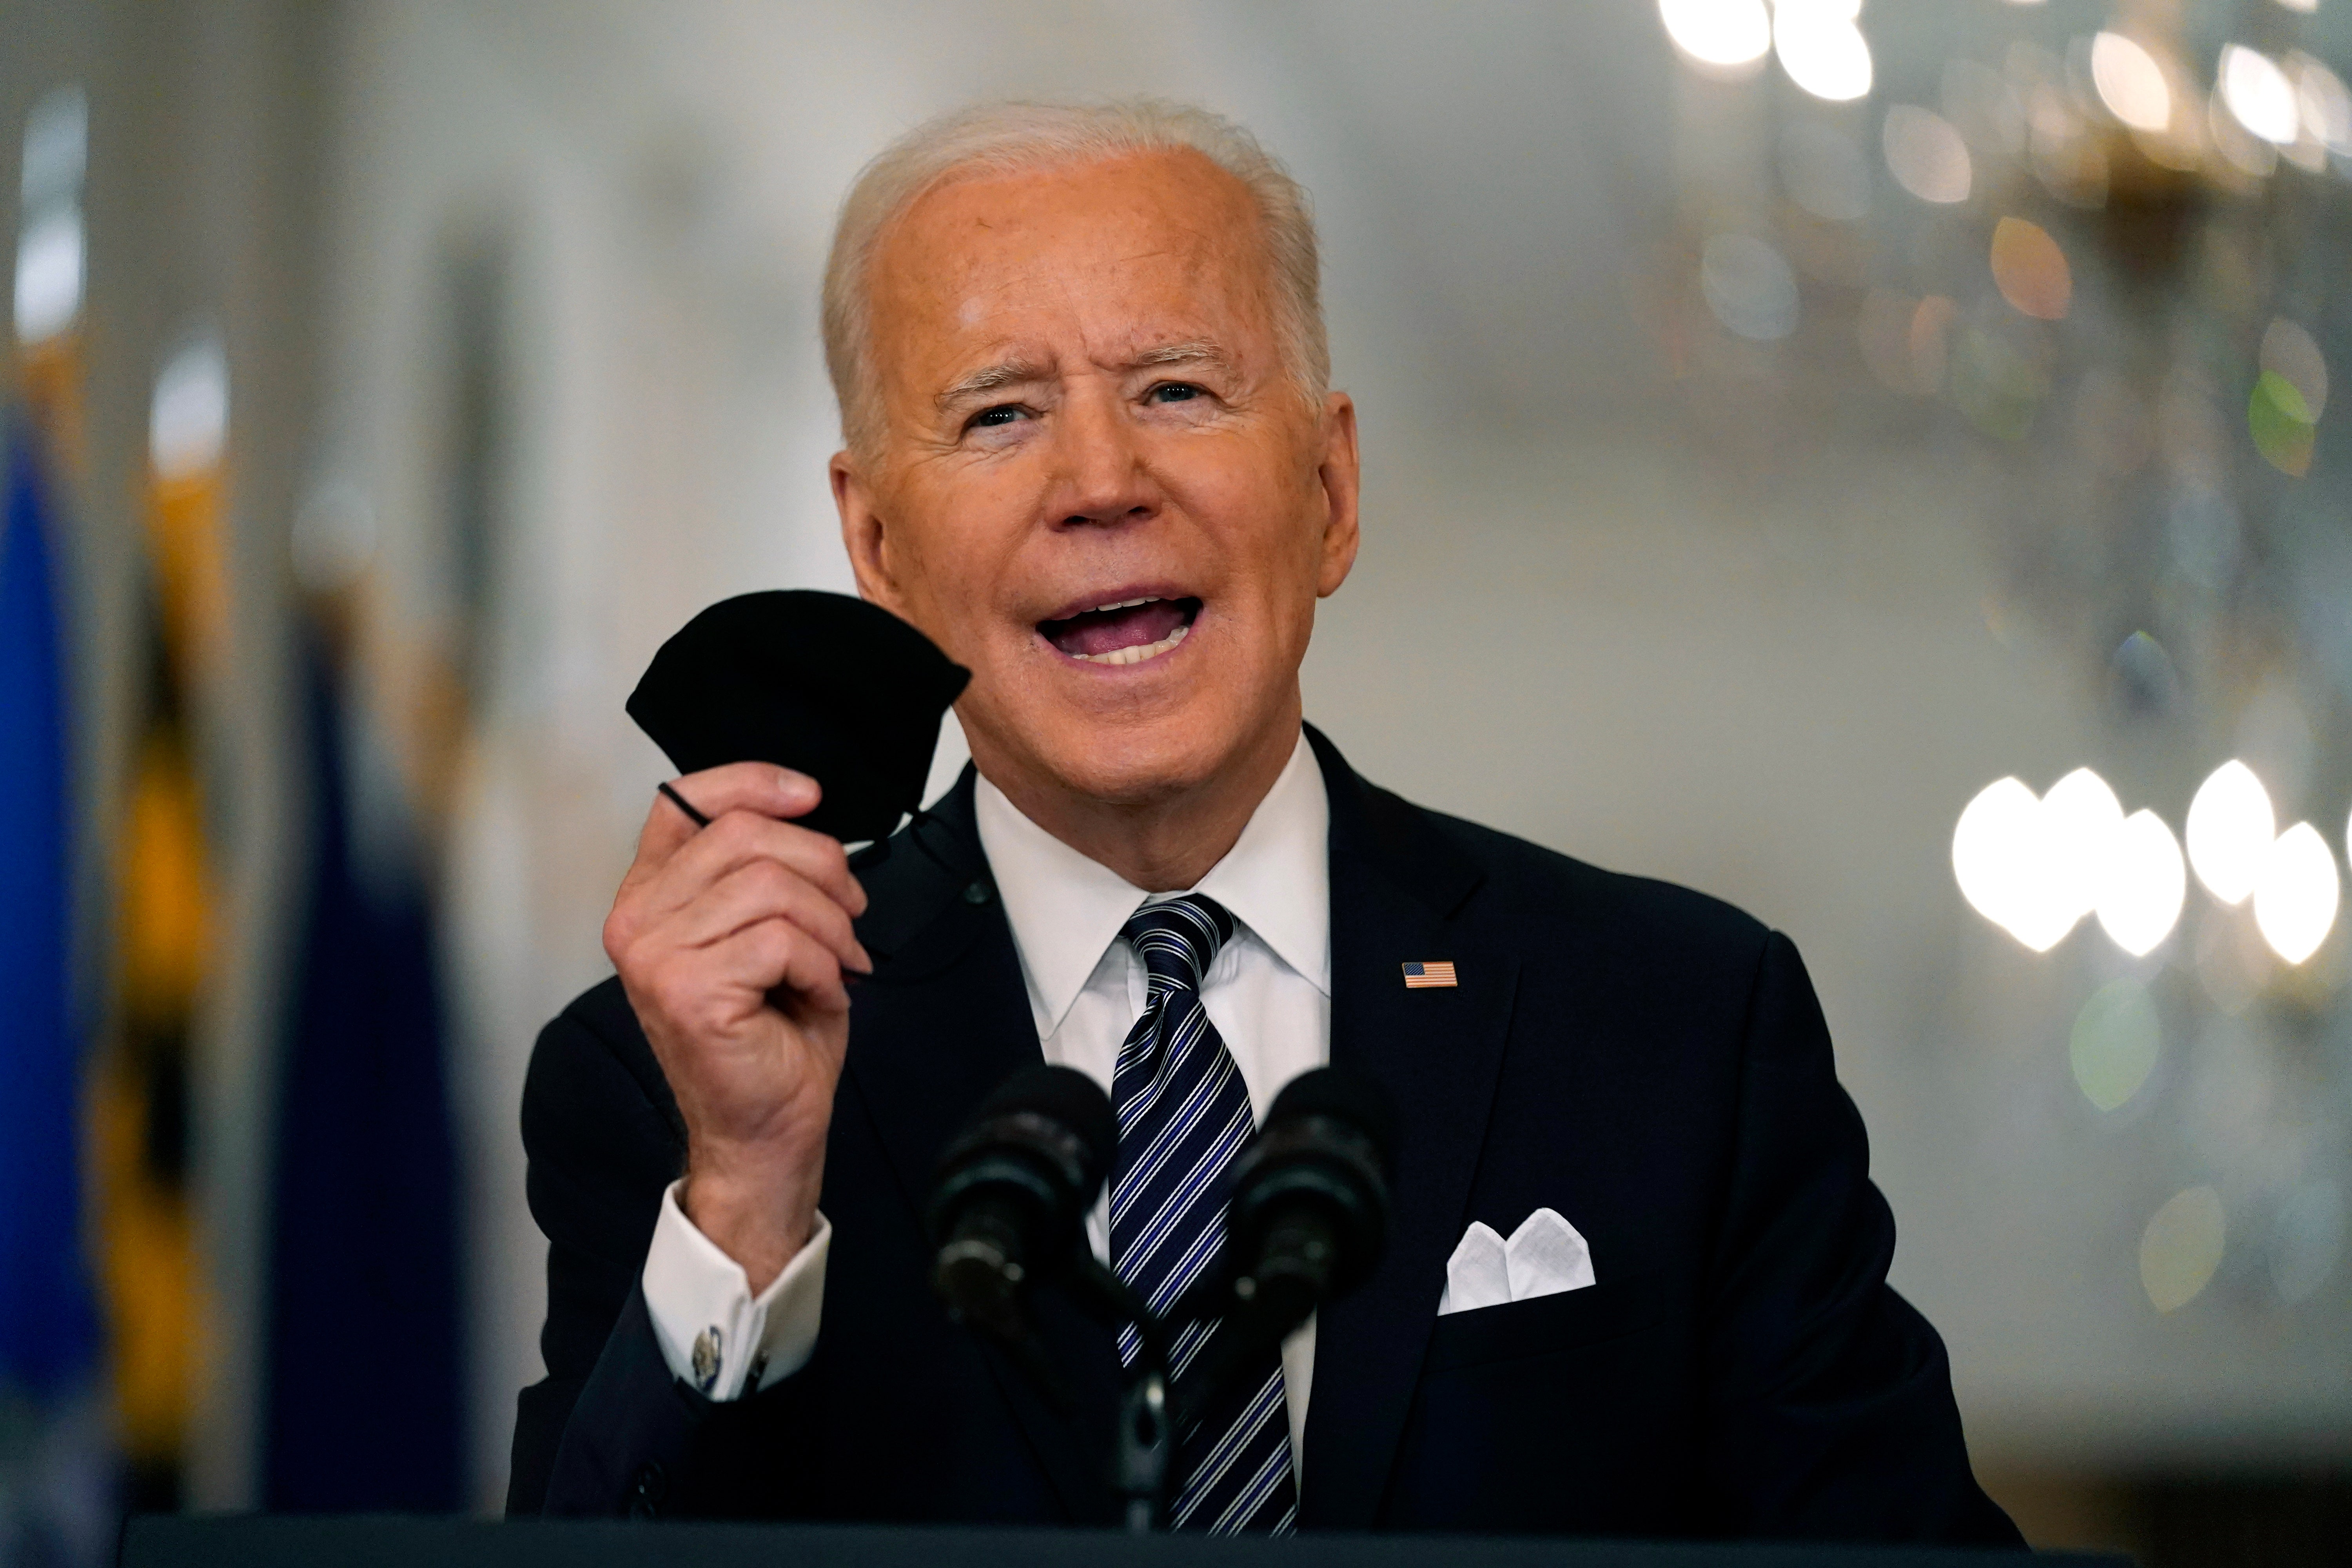 Republicans scratch heads at Biden's goals for May COVID vaccine eligibility, July Fourth family gatherings